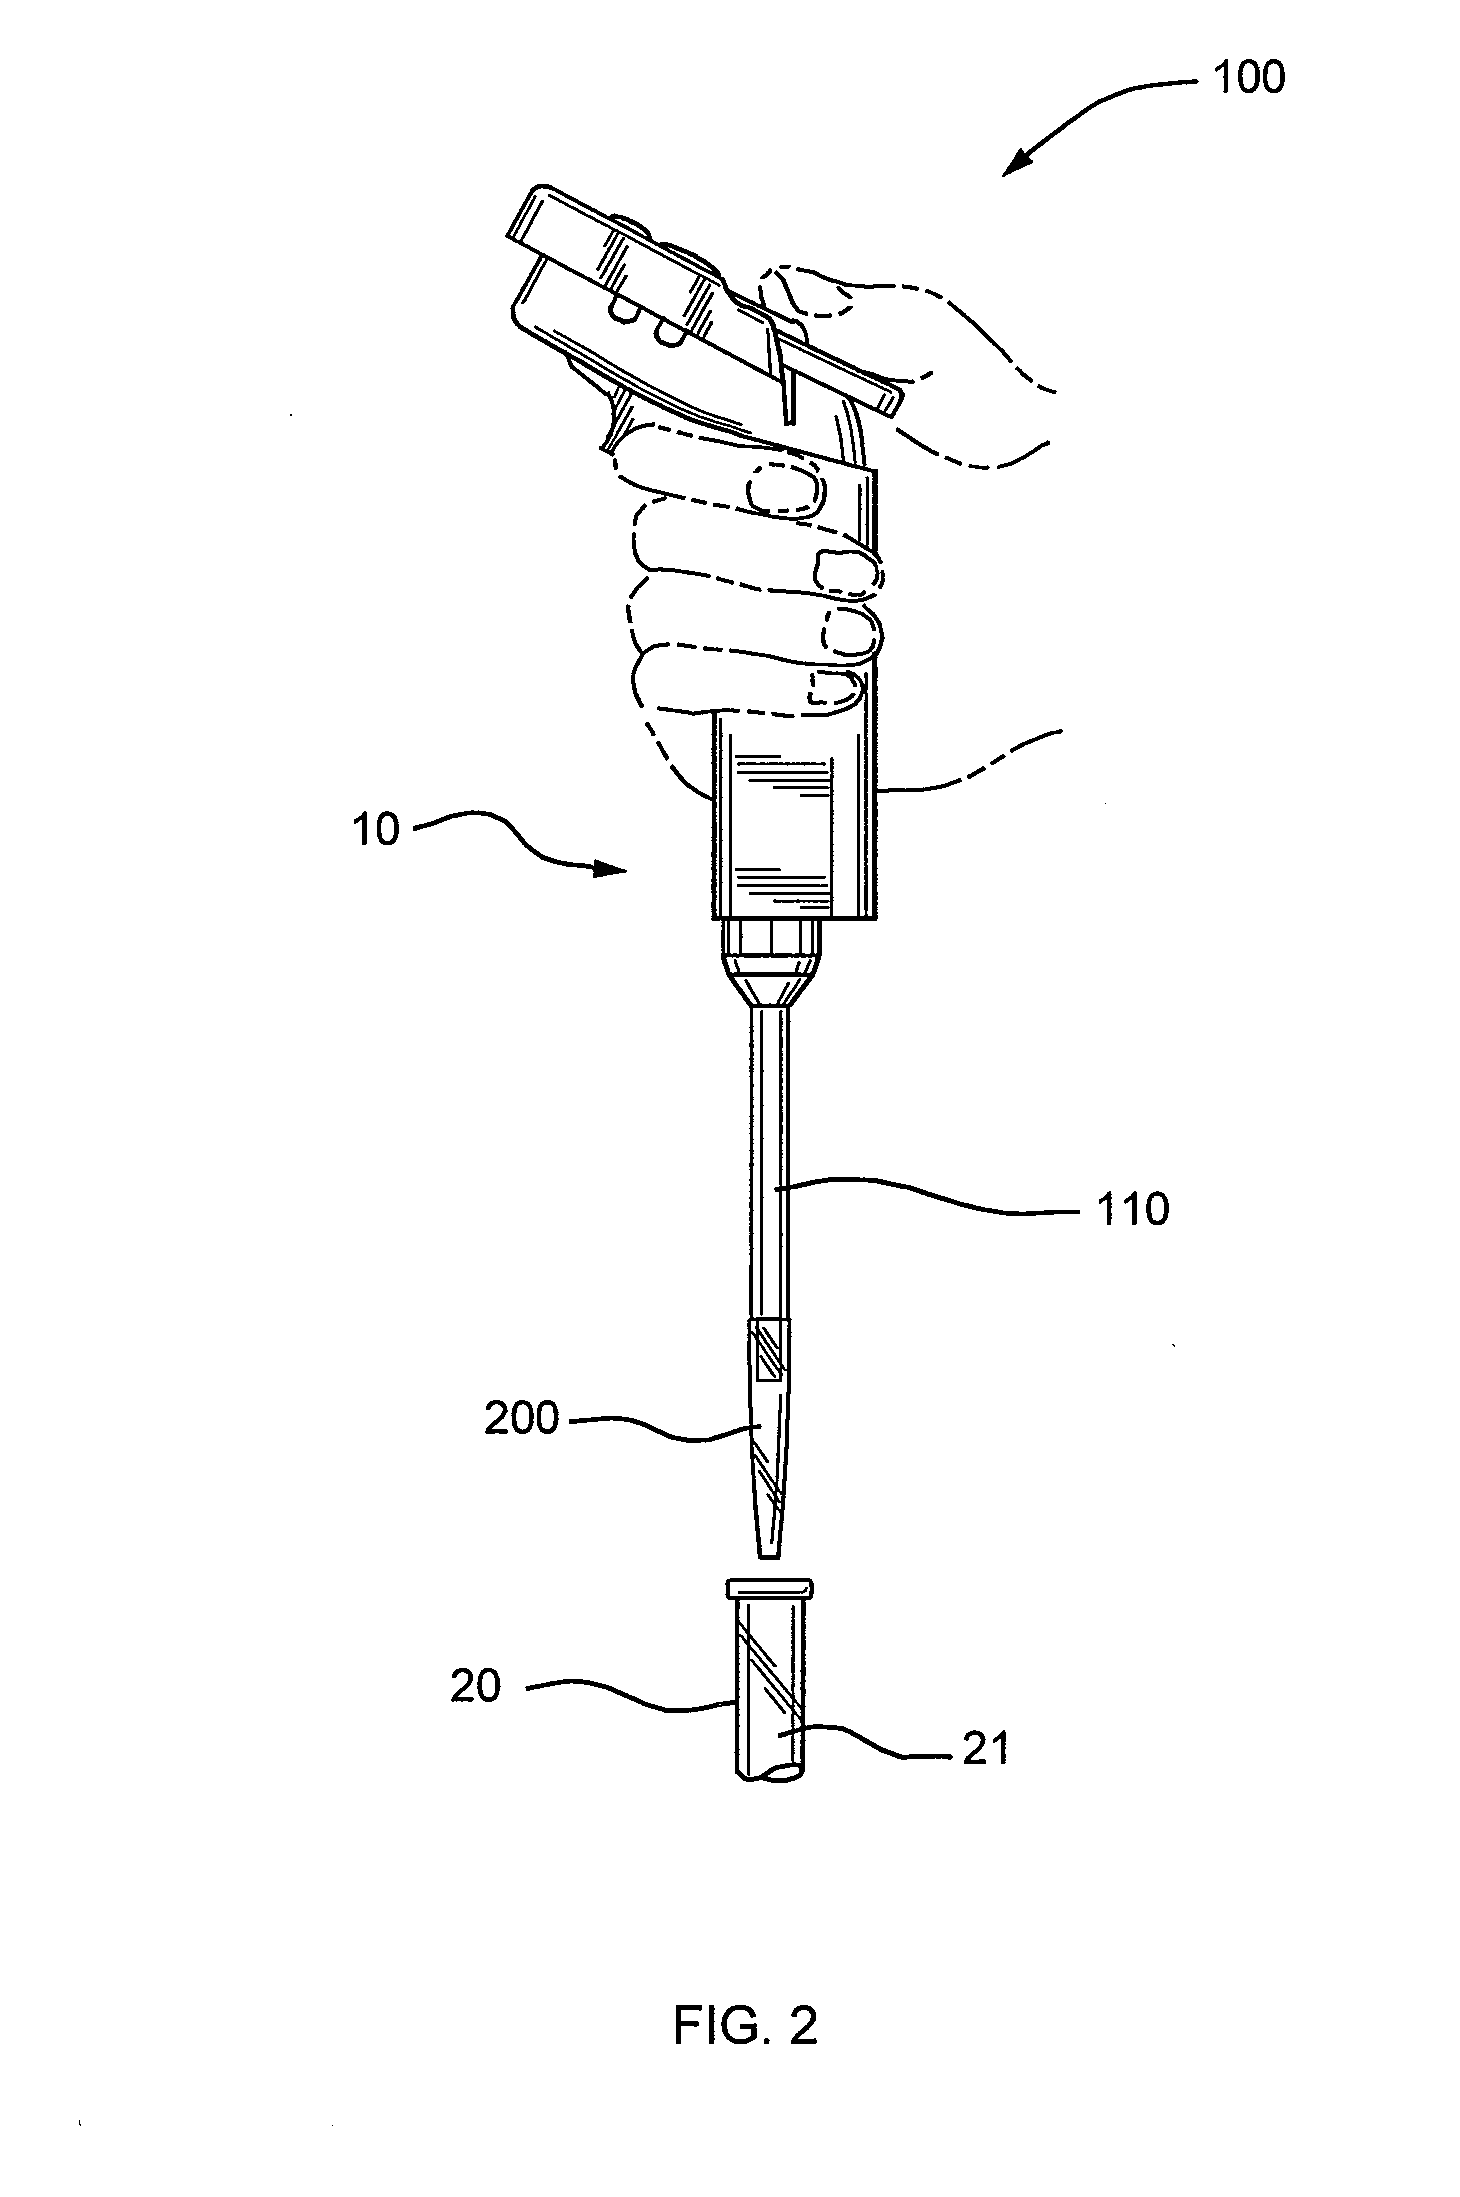 System and method for liquid delivery evaluation using solutions with multiple light absorbance spectral features